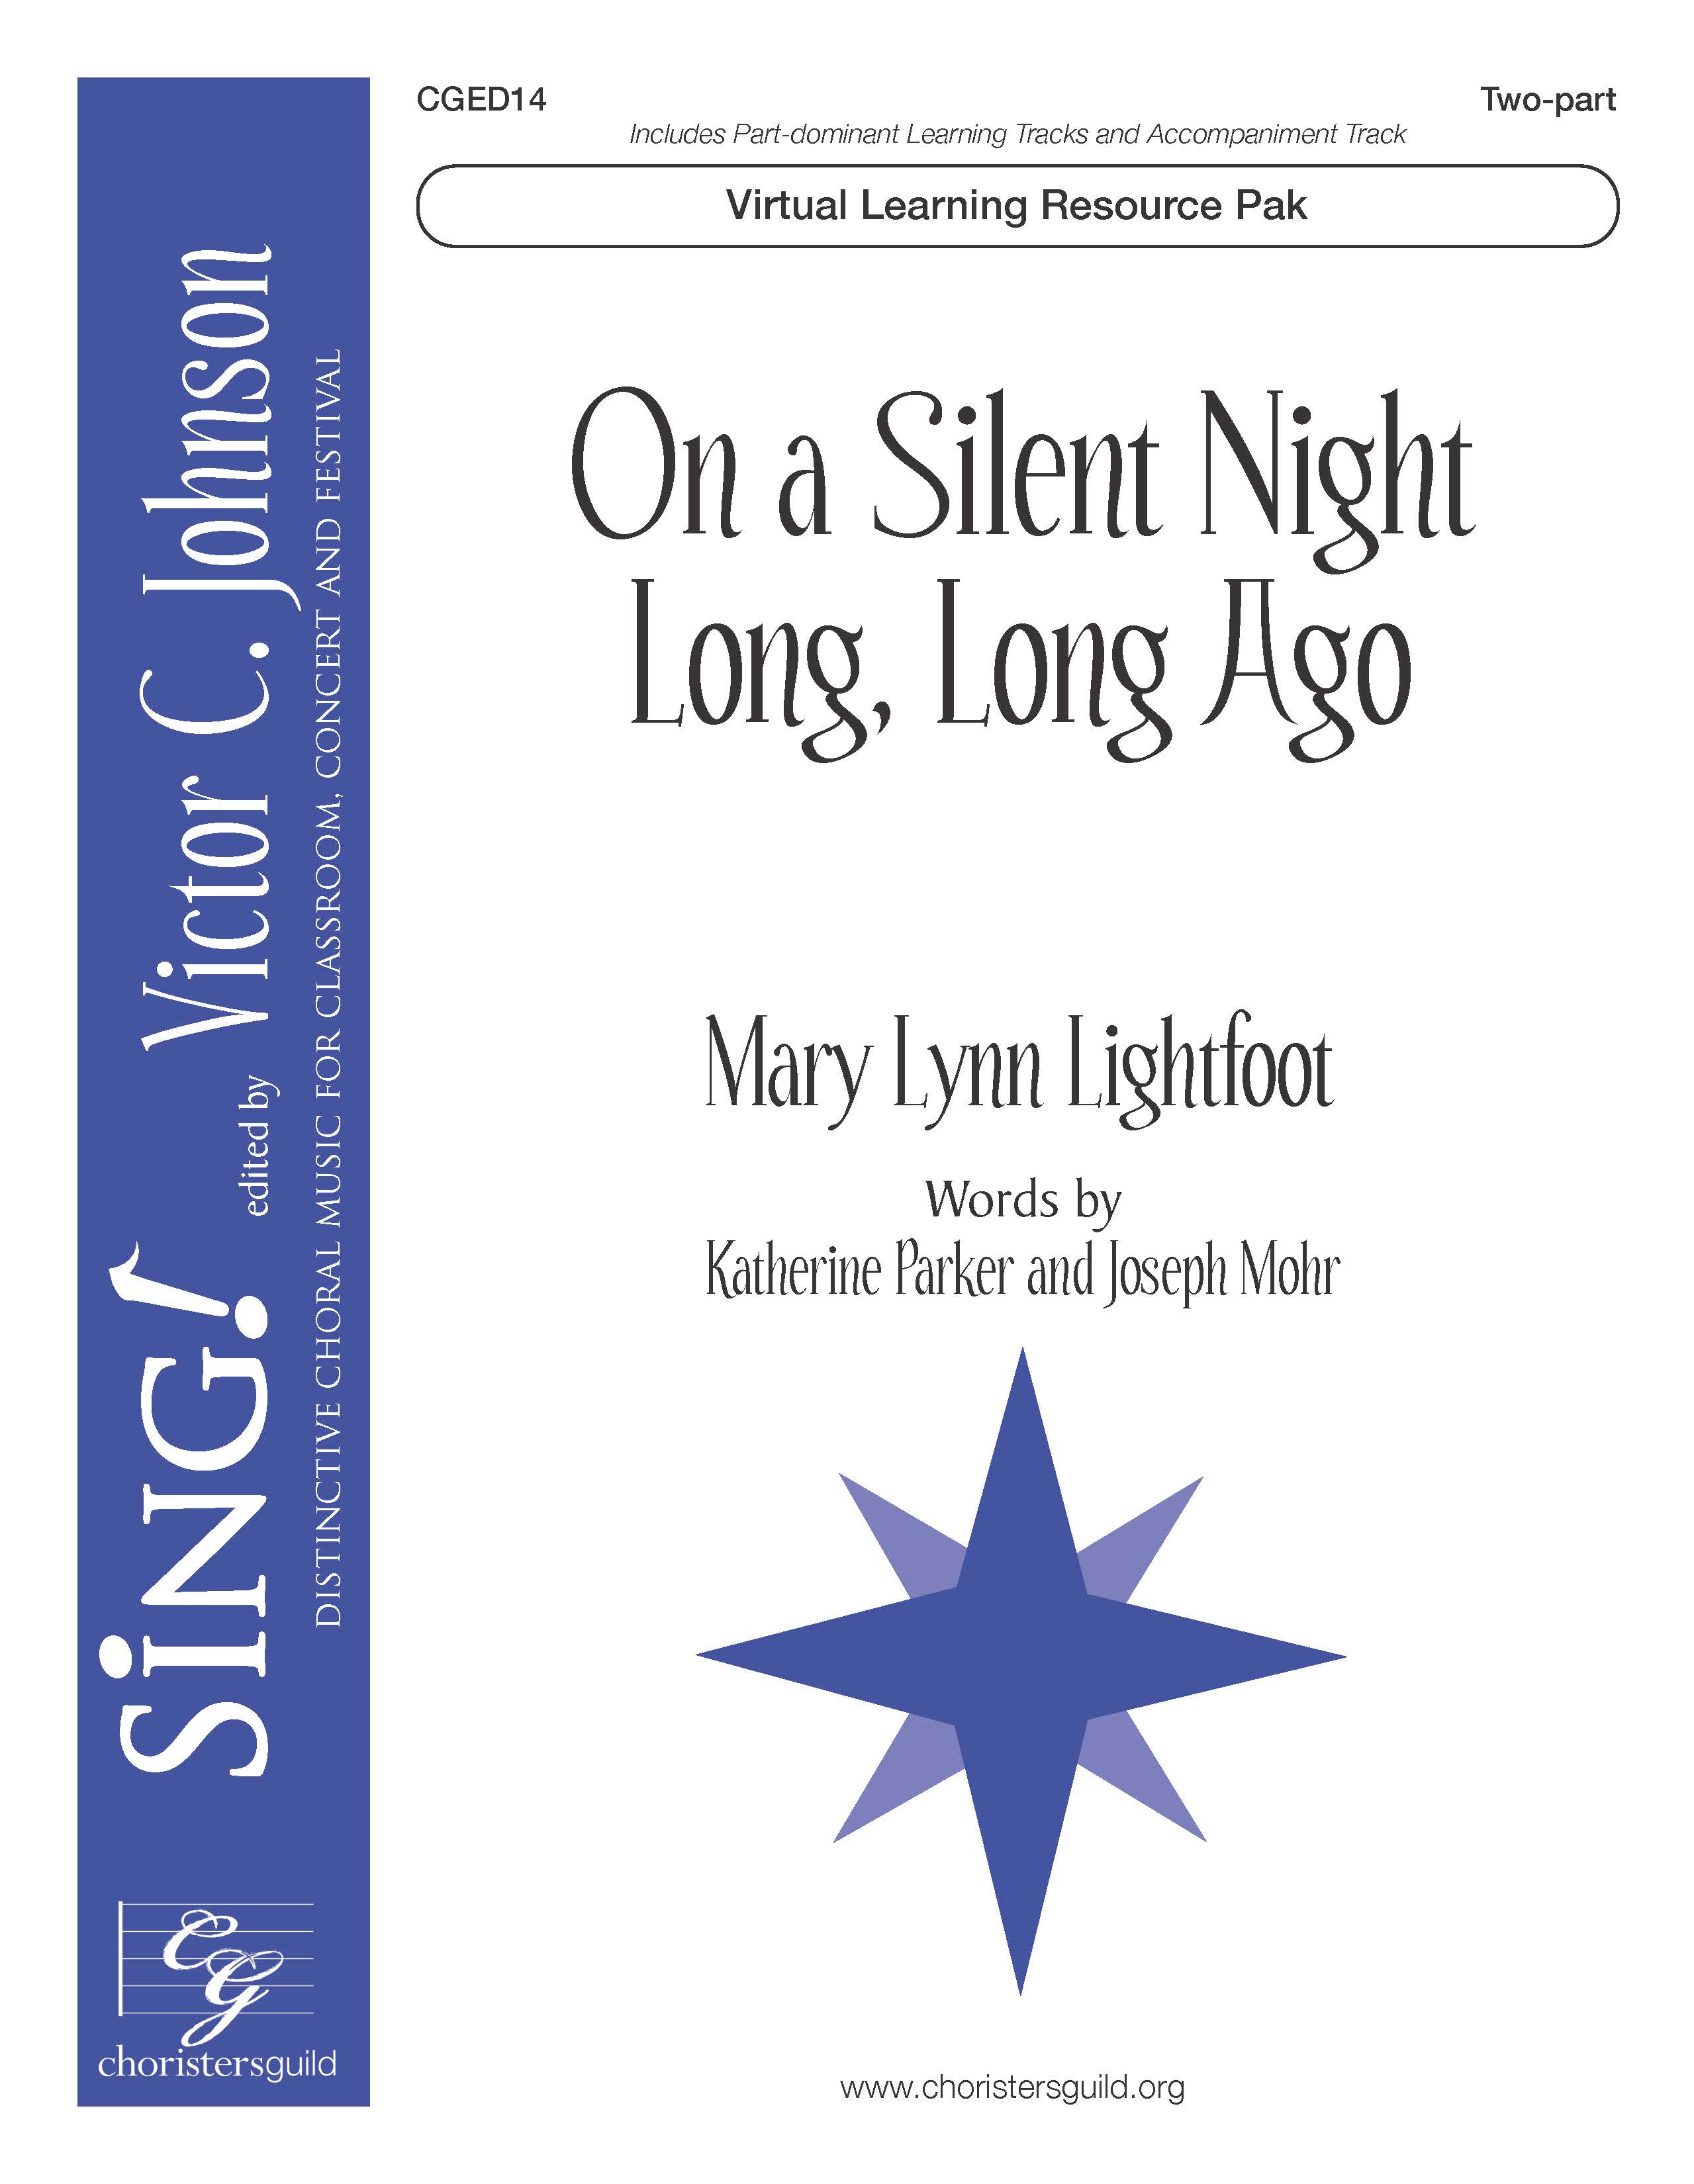 On a Silent Night Long, Long Ago (Virtual Learning Resource Pak) - Two-part